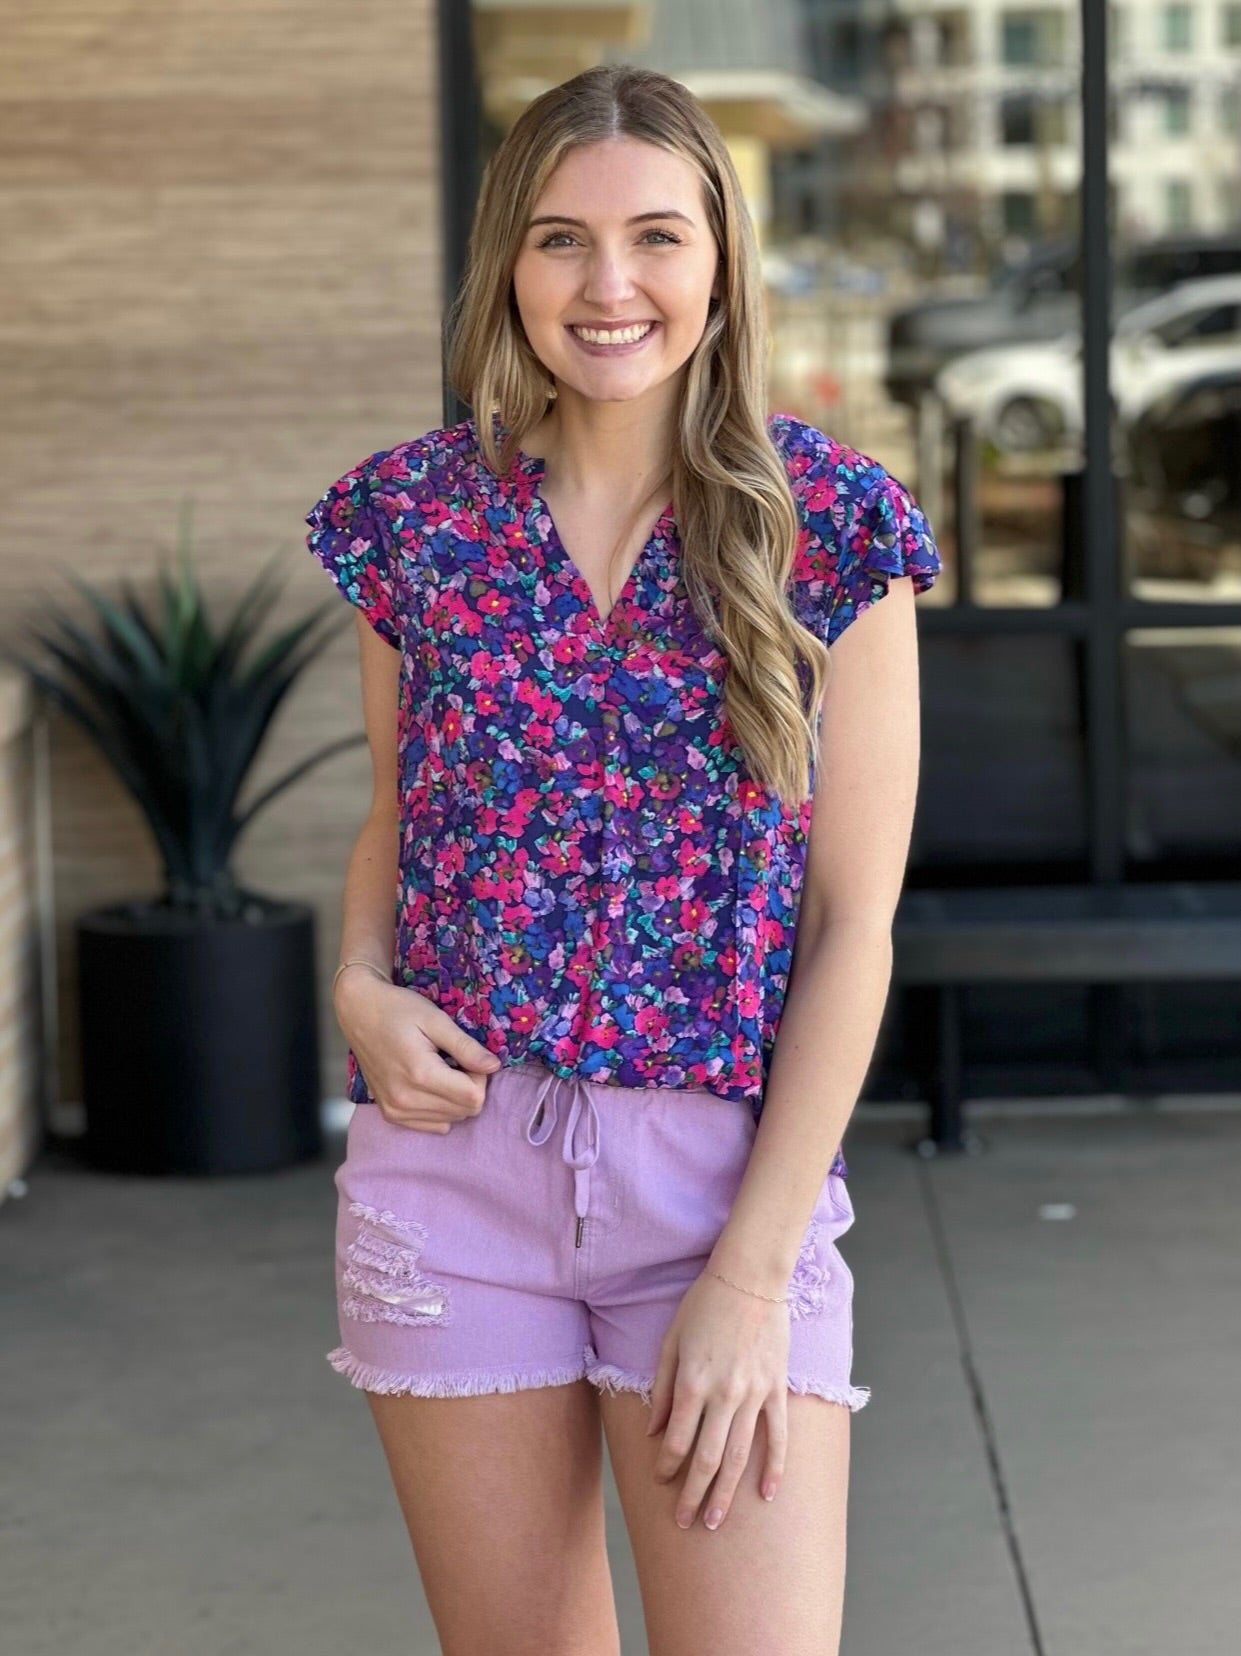 Lexi in multi blouse front view smiling